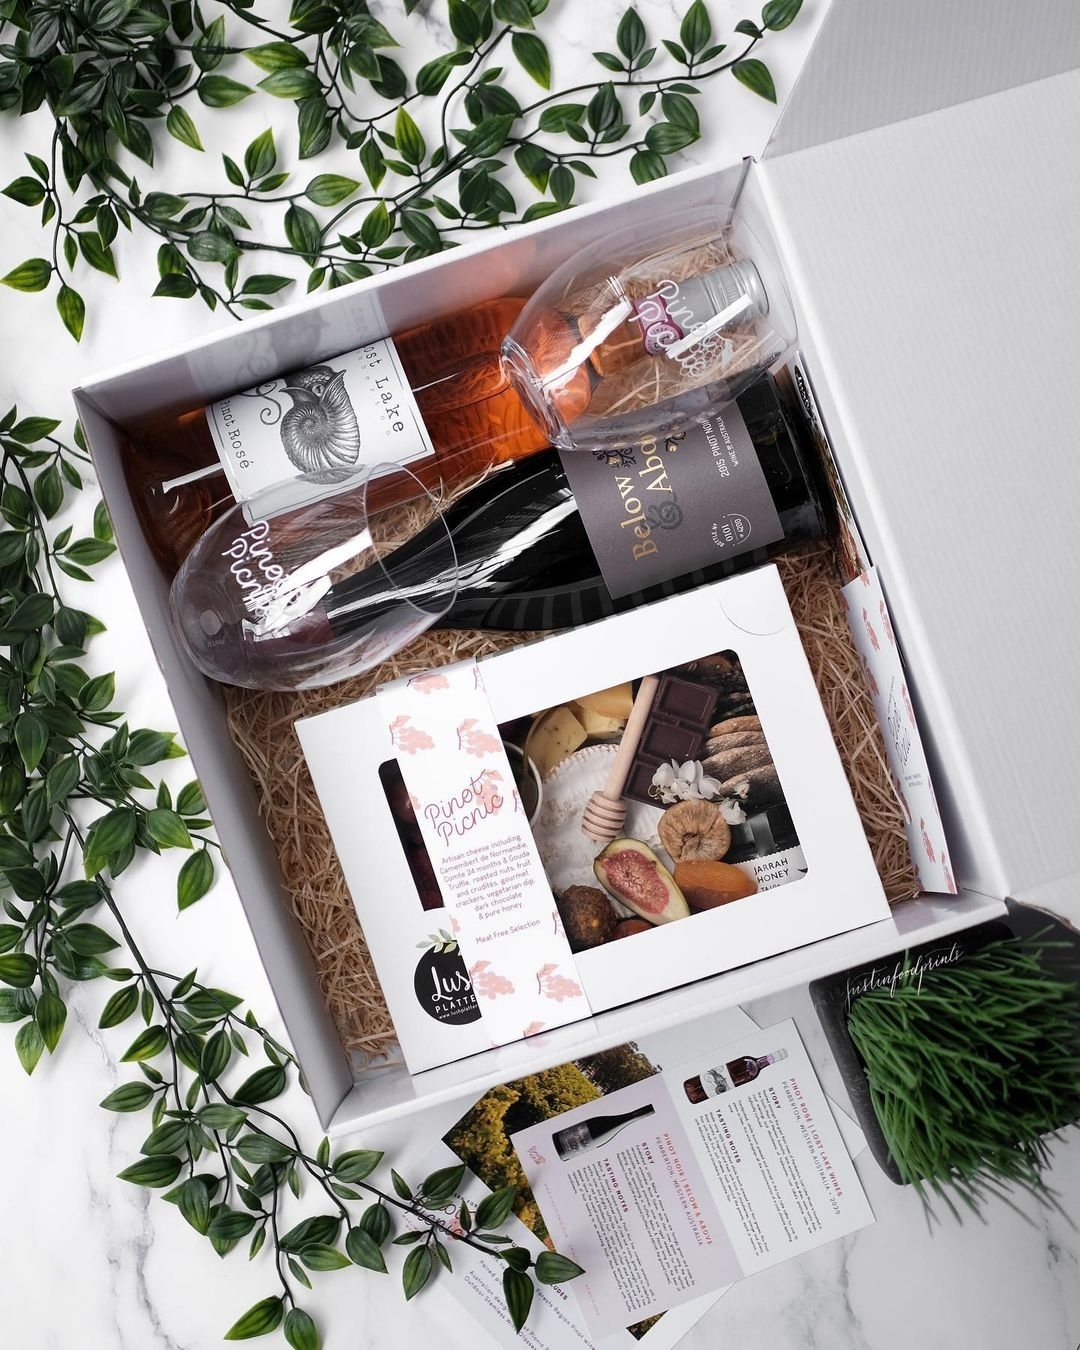 Picnic Hamper Box with Wine and Produce